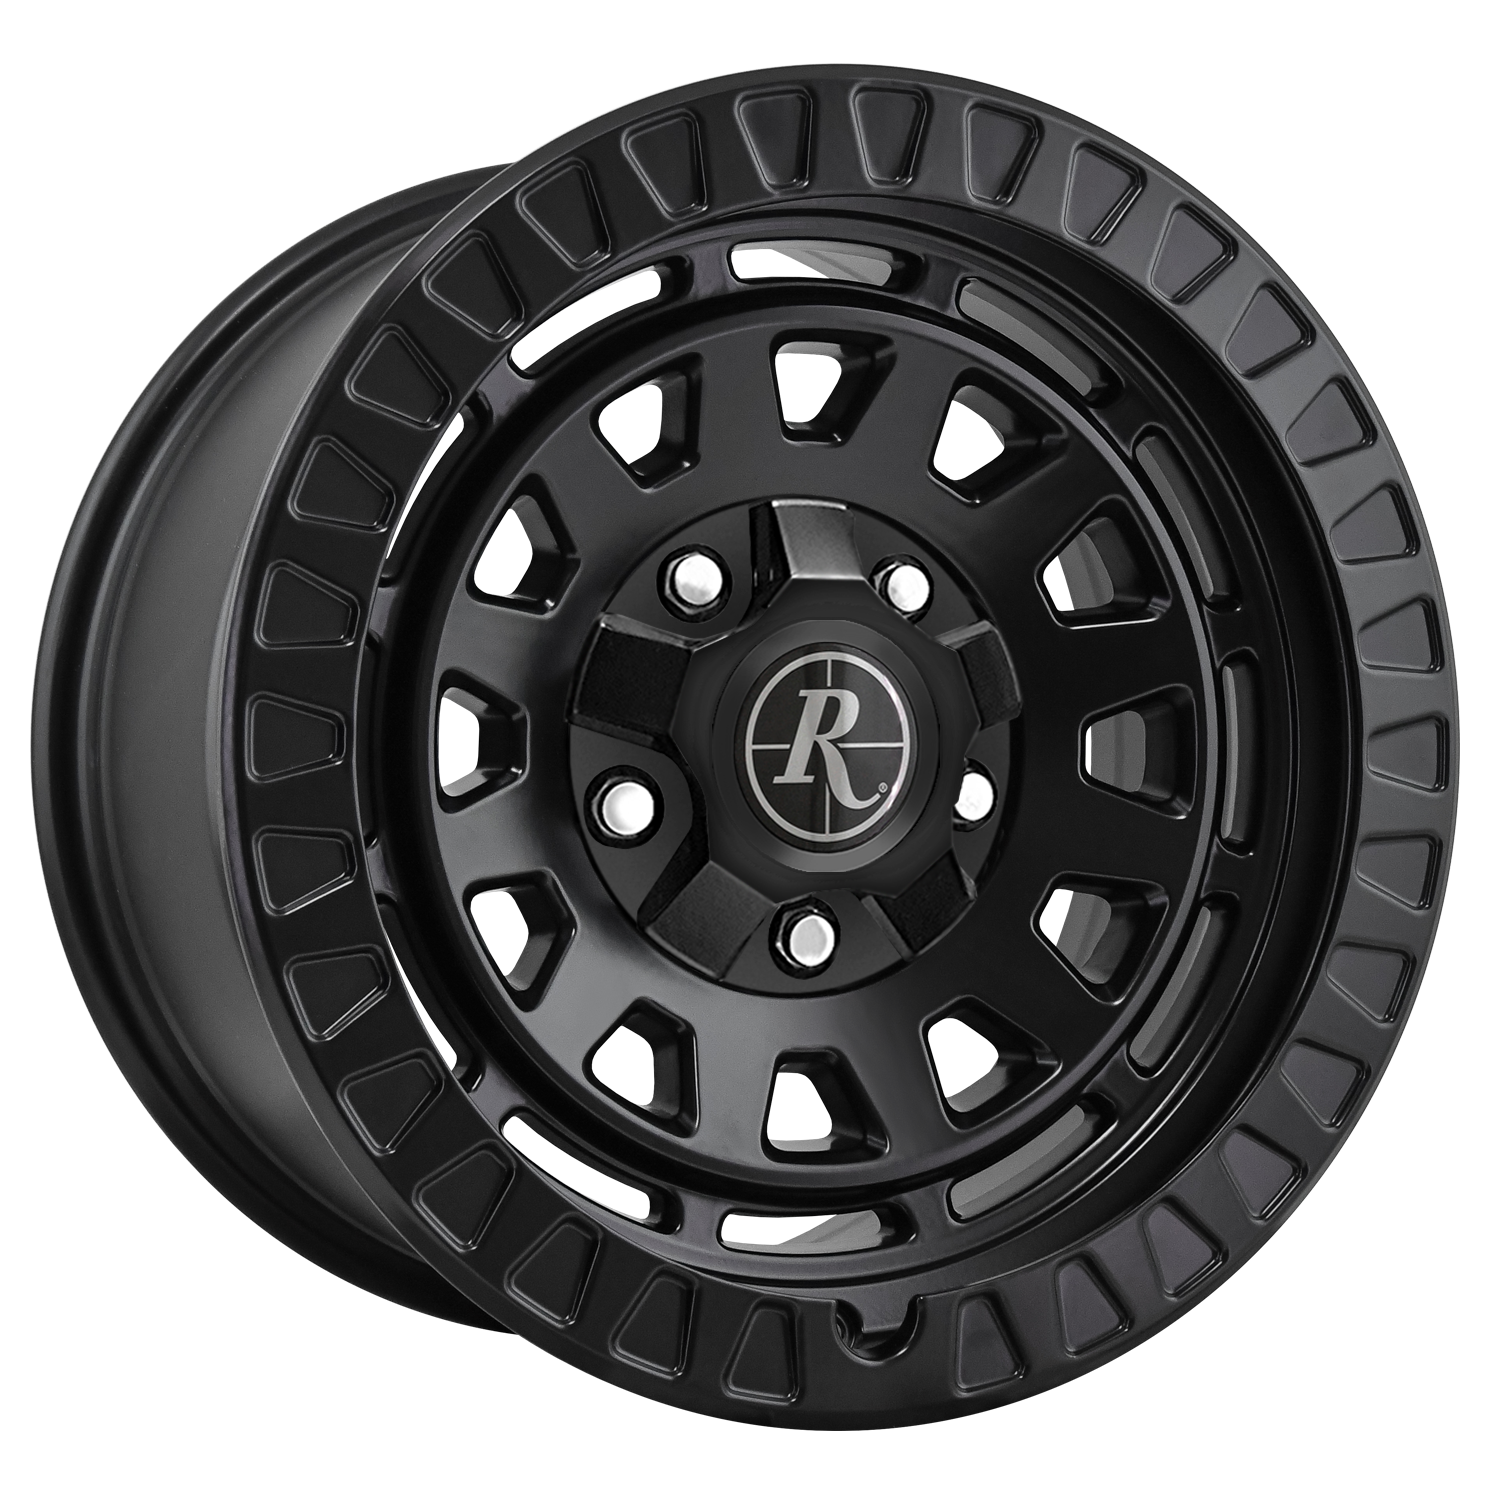 Remington® Off-Road - Venture - Offroad Truck & SUV - Part Number: VE1790580ASB Wheel